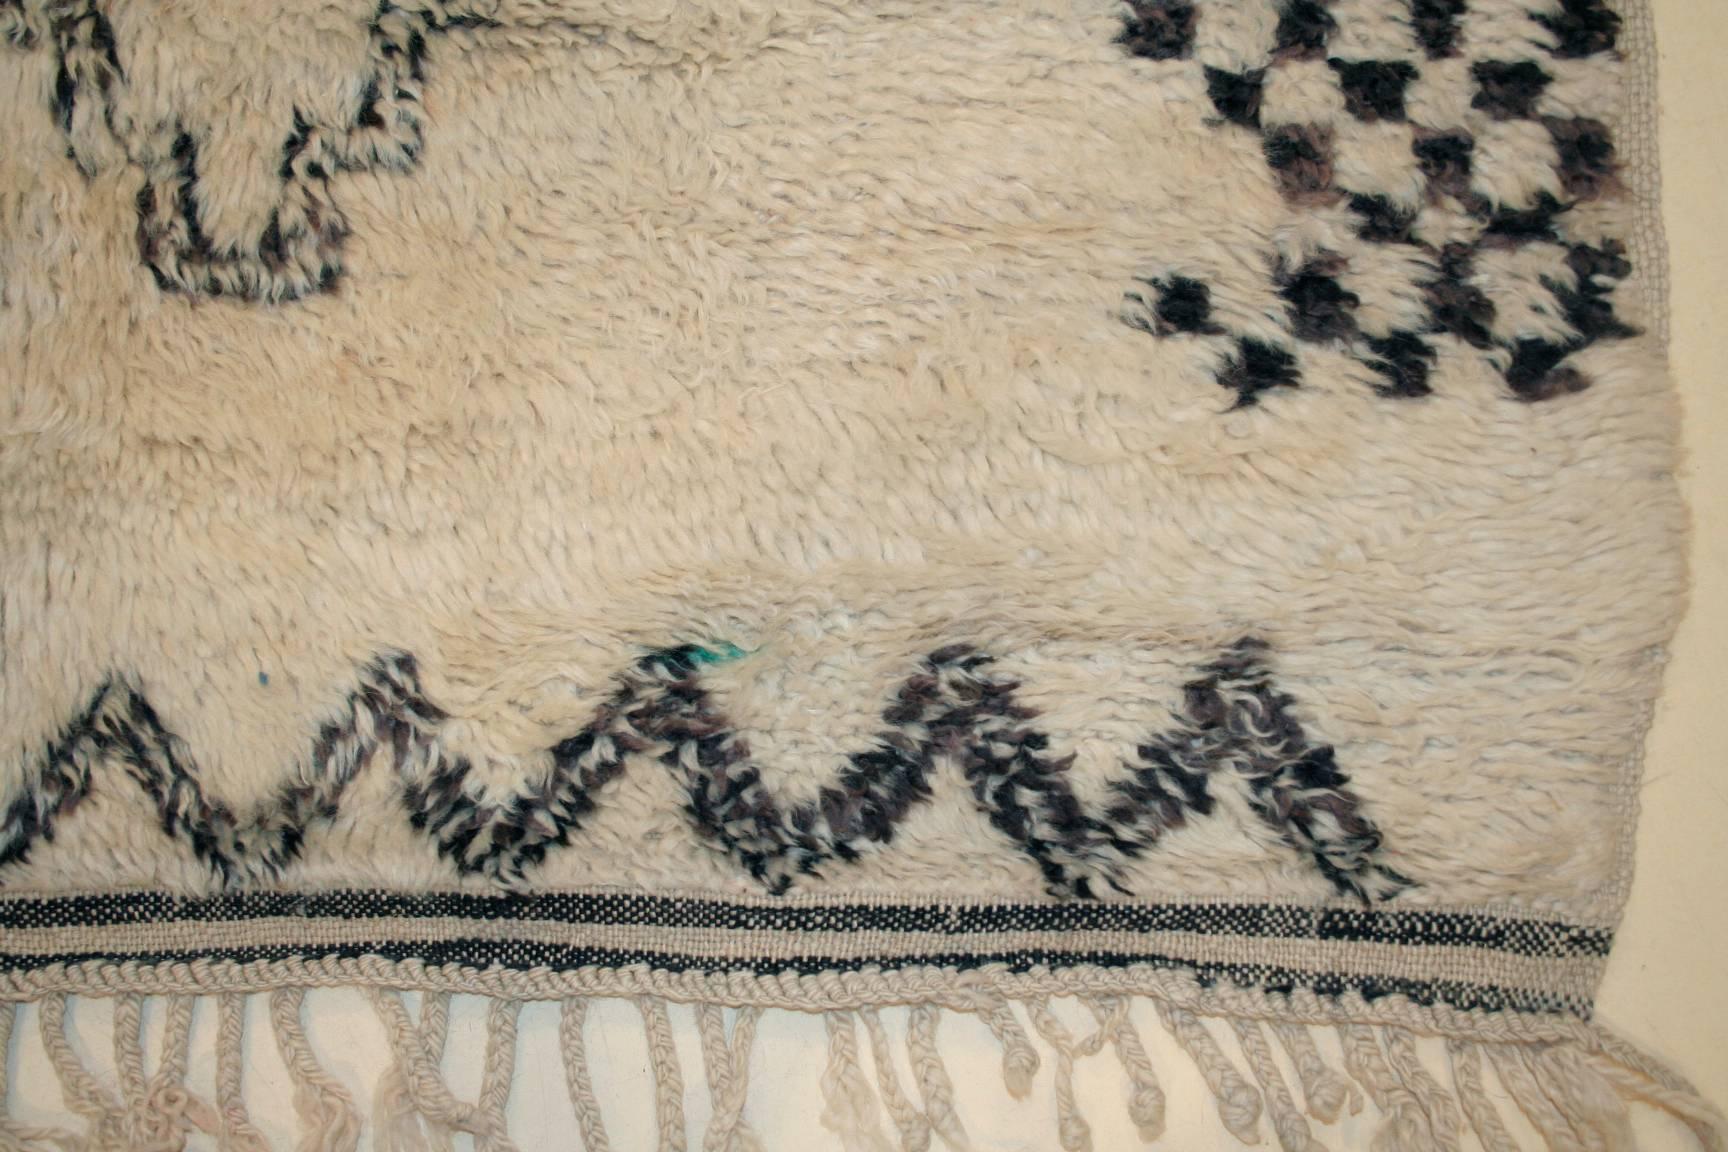 The rugs of the Beni Ouarain tribal confederacy, located in the northeastern portion of the Moroccan Middle Atlas, differ from other Berber weavings in that they are woven almost exclusively on an ivory background and decorated with abstract